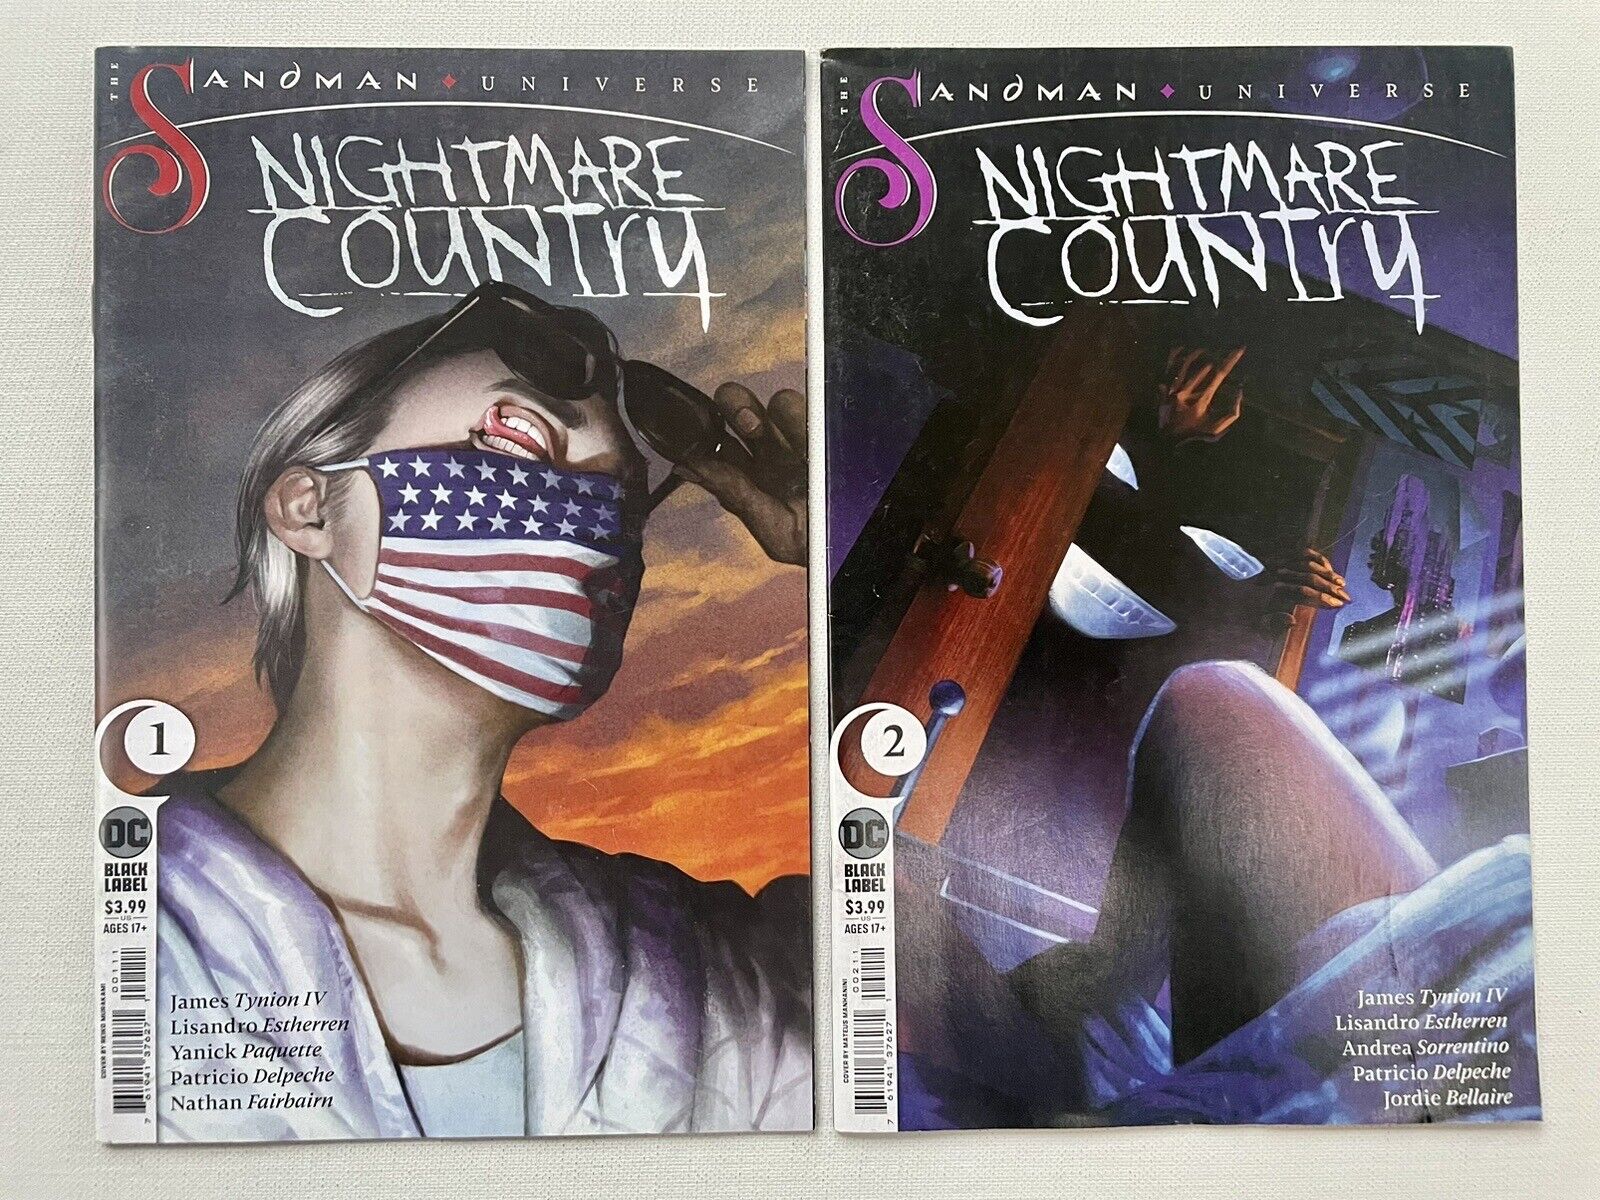 Sandman Universe NIGHTMARE COUNTRY 1, 2 Main Cover A; DC Comics, 2022, Great!